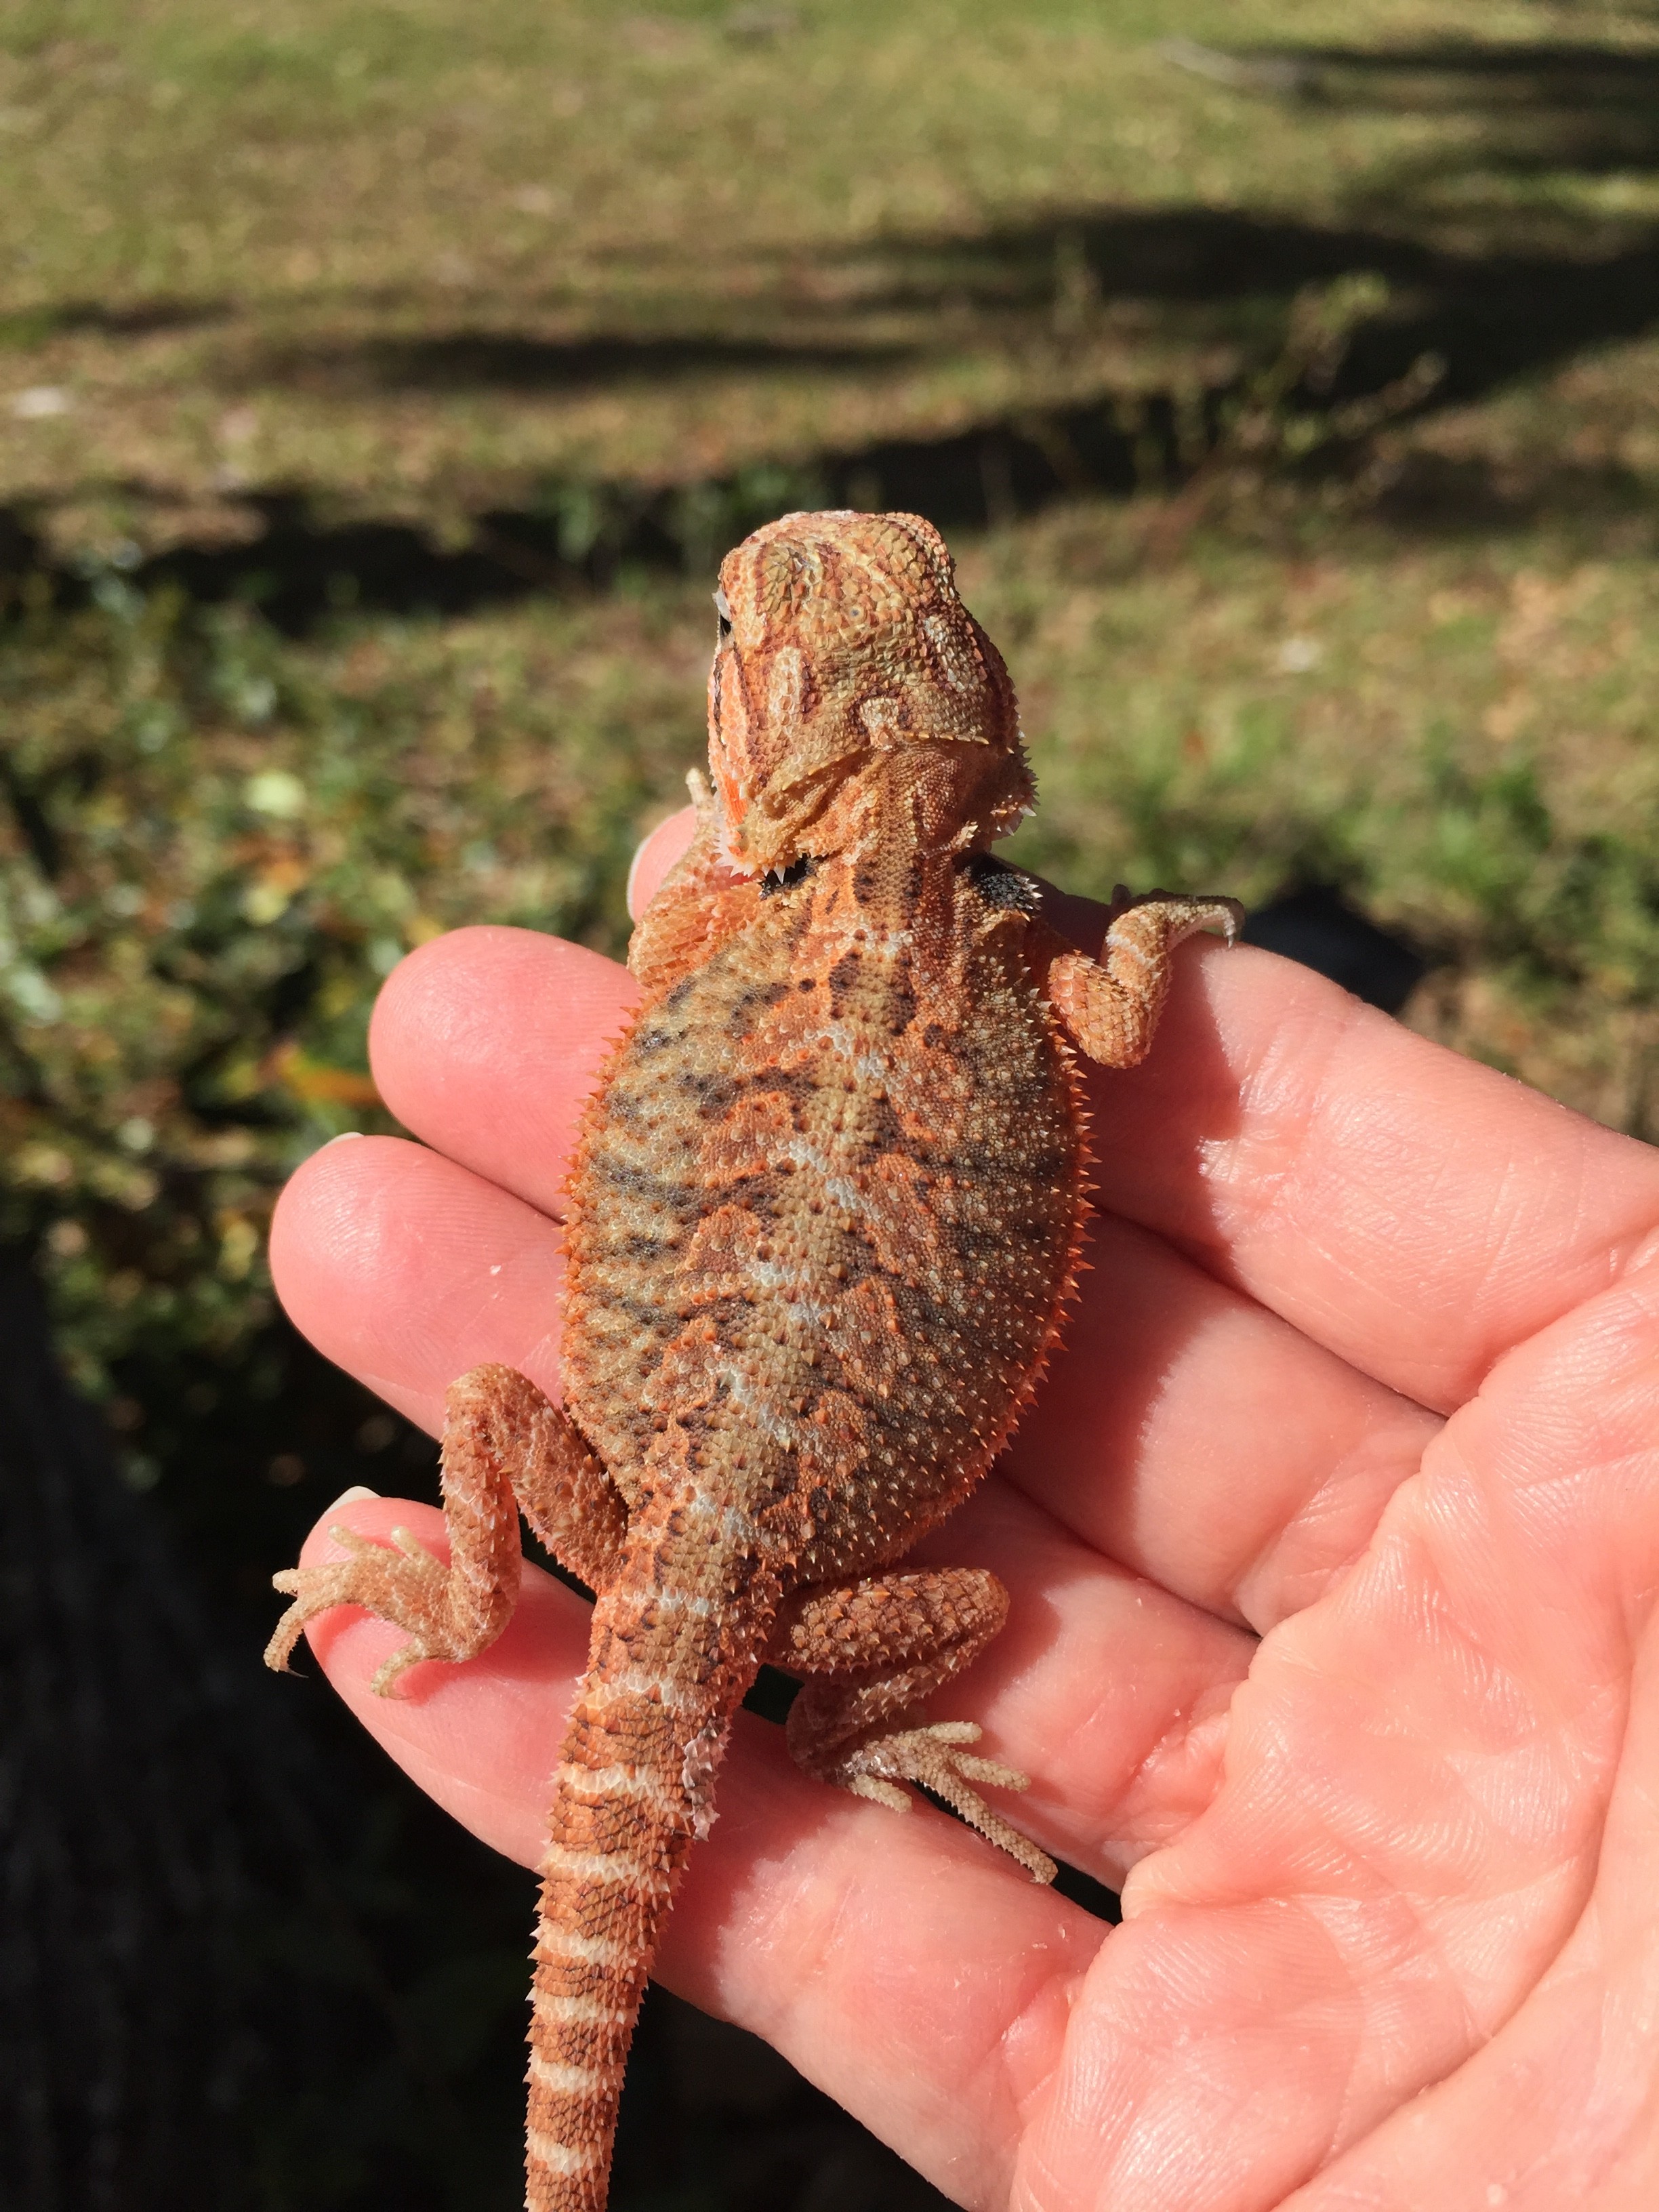 Trans Male Central Bearded Dragon by FairyTail Dragons LLC